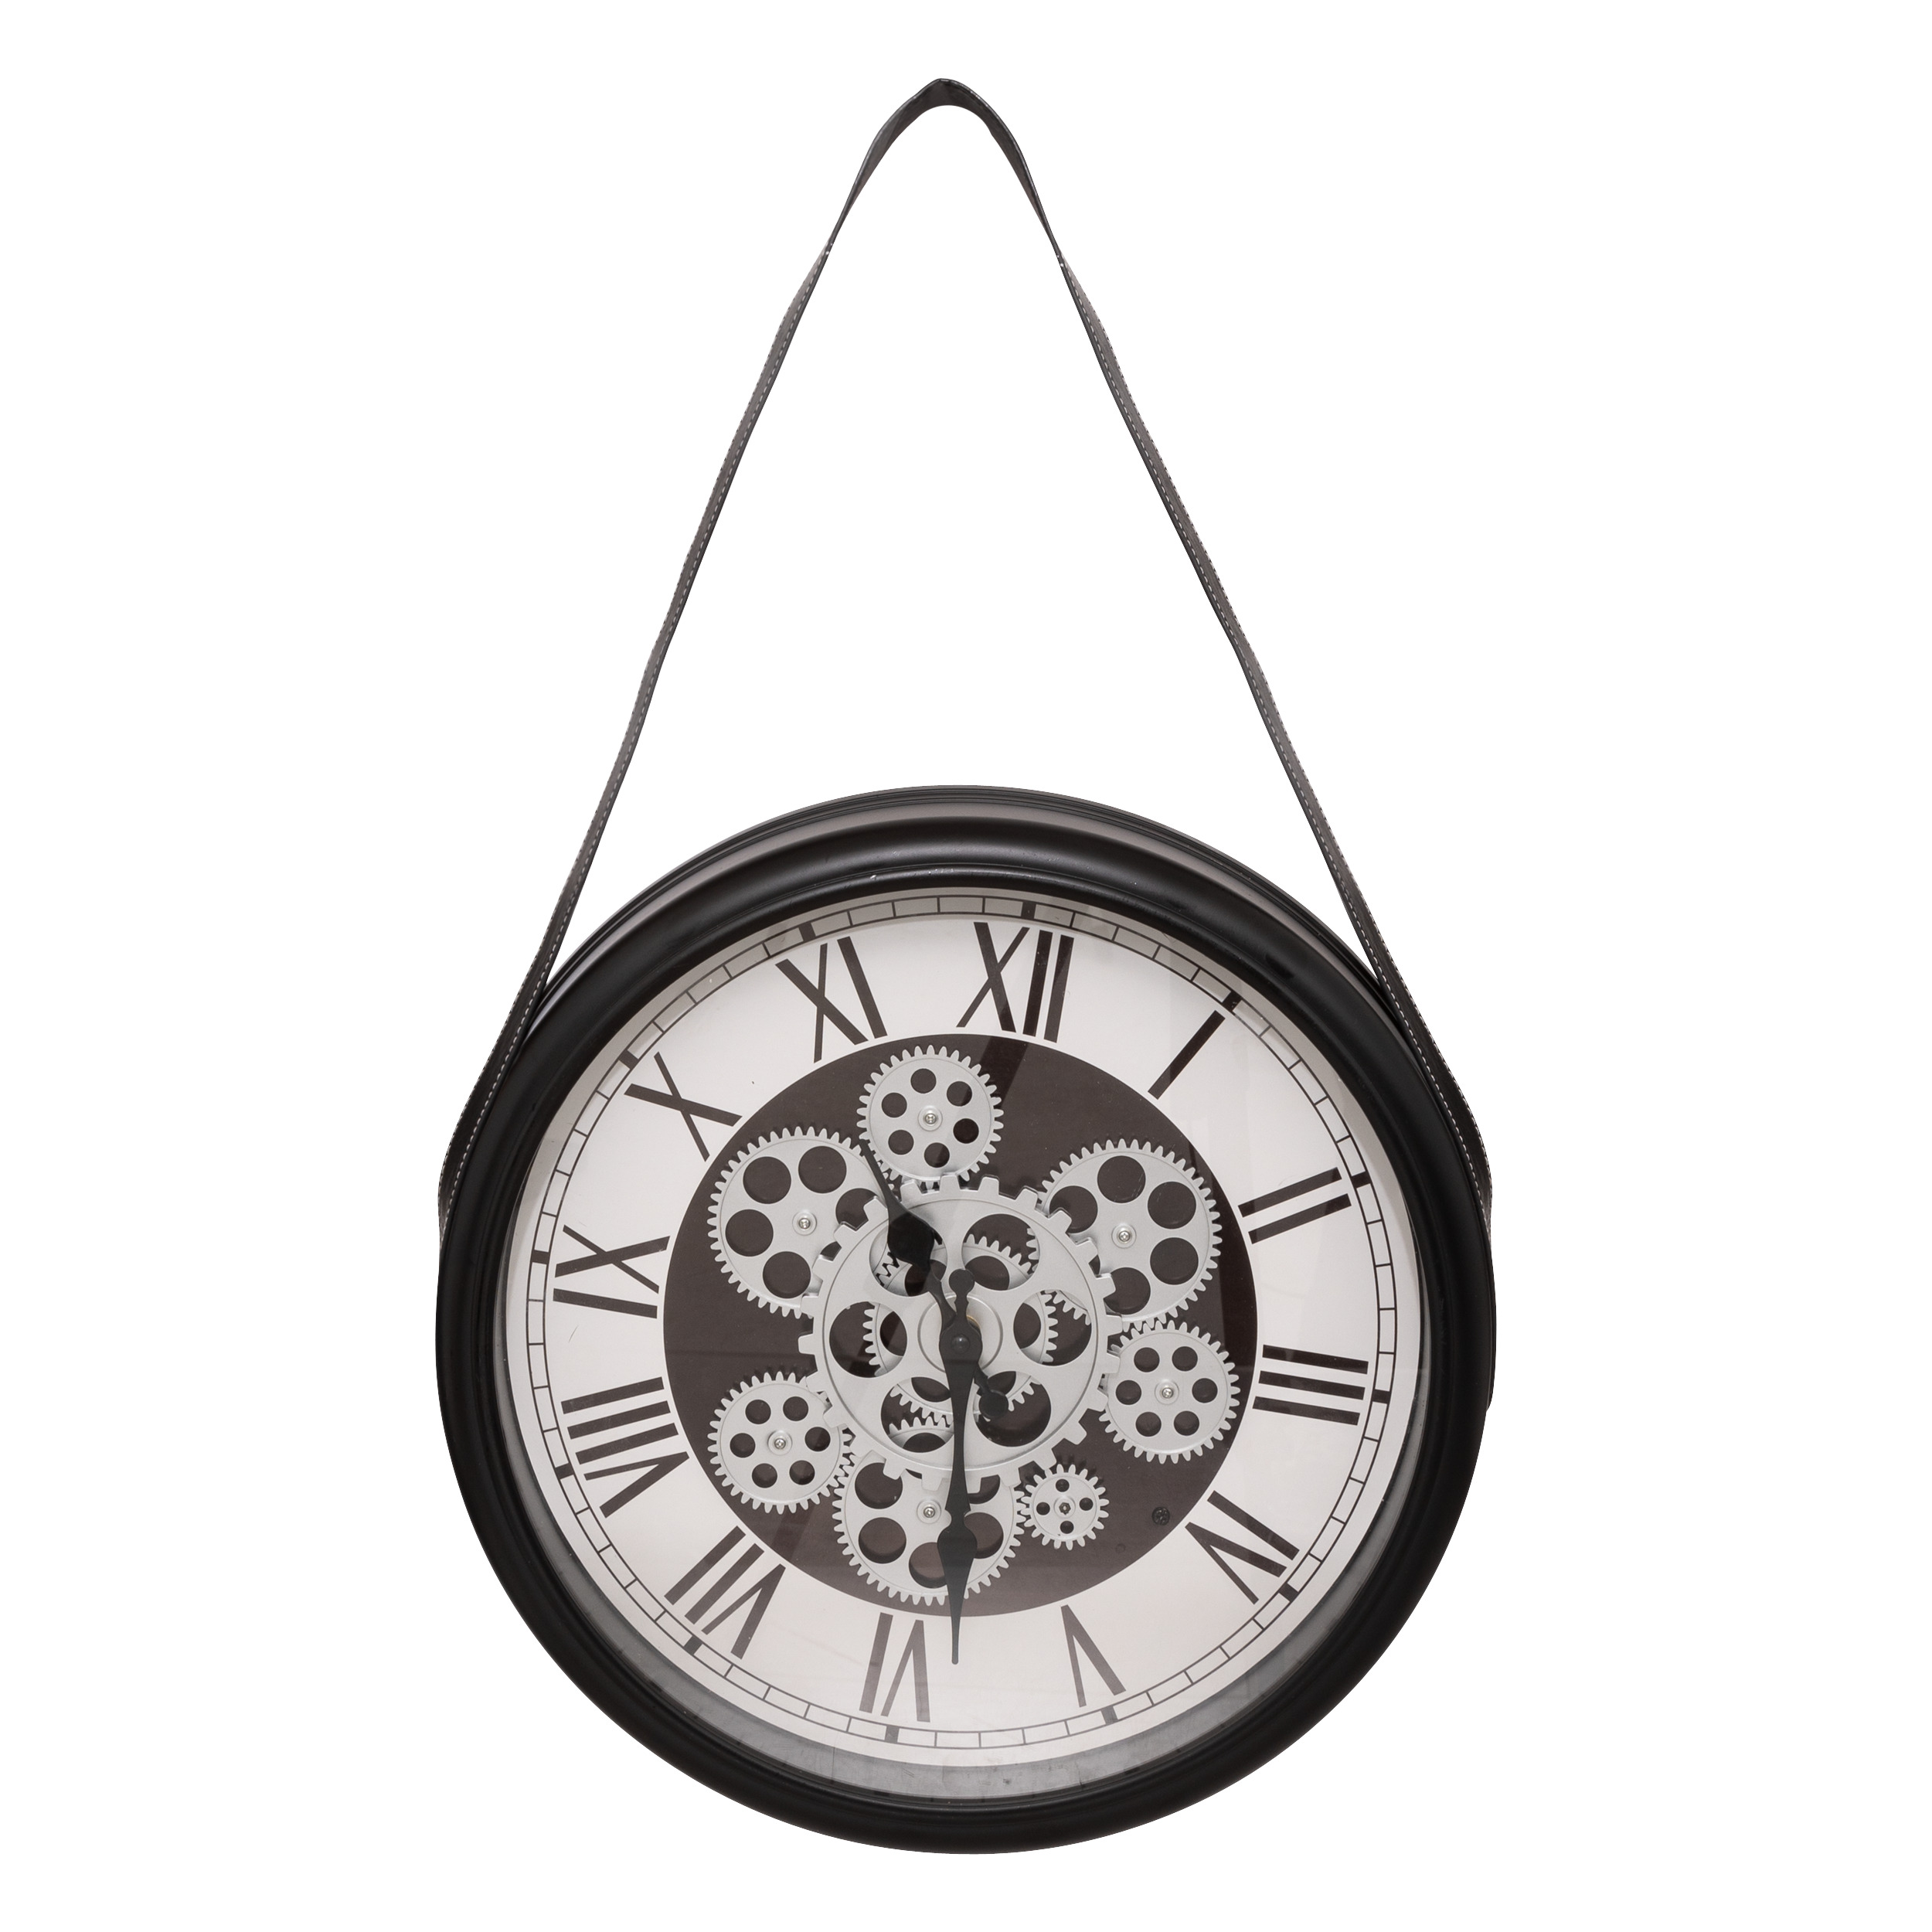 Aw24 Peter Clock With Hanging Belt D40cm Plastic Gift